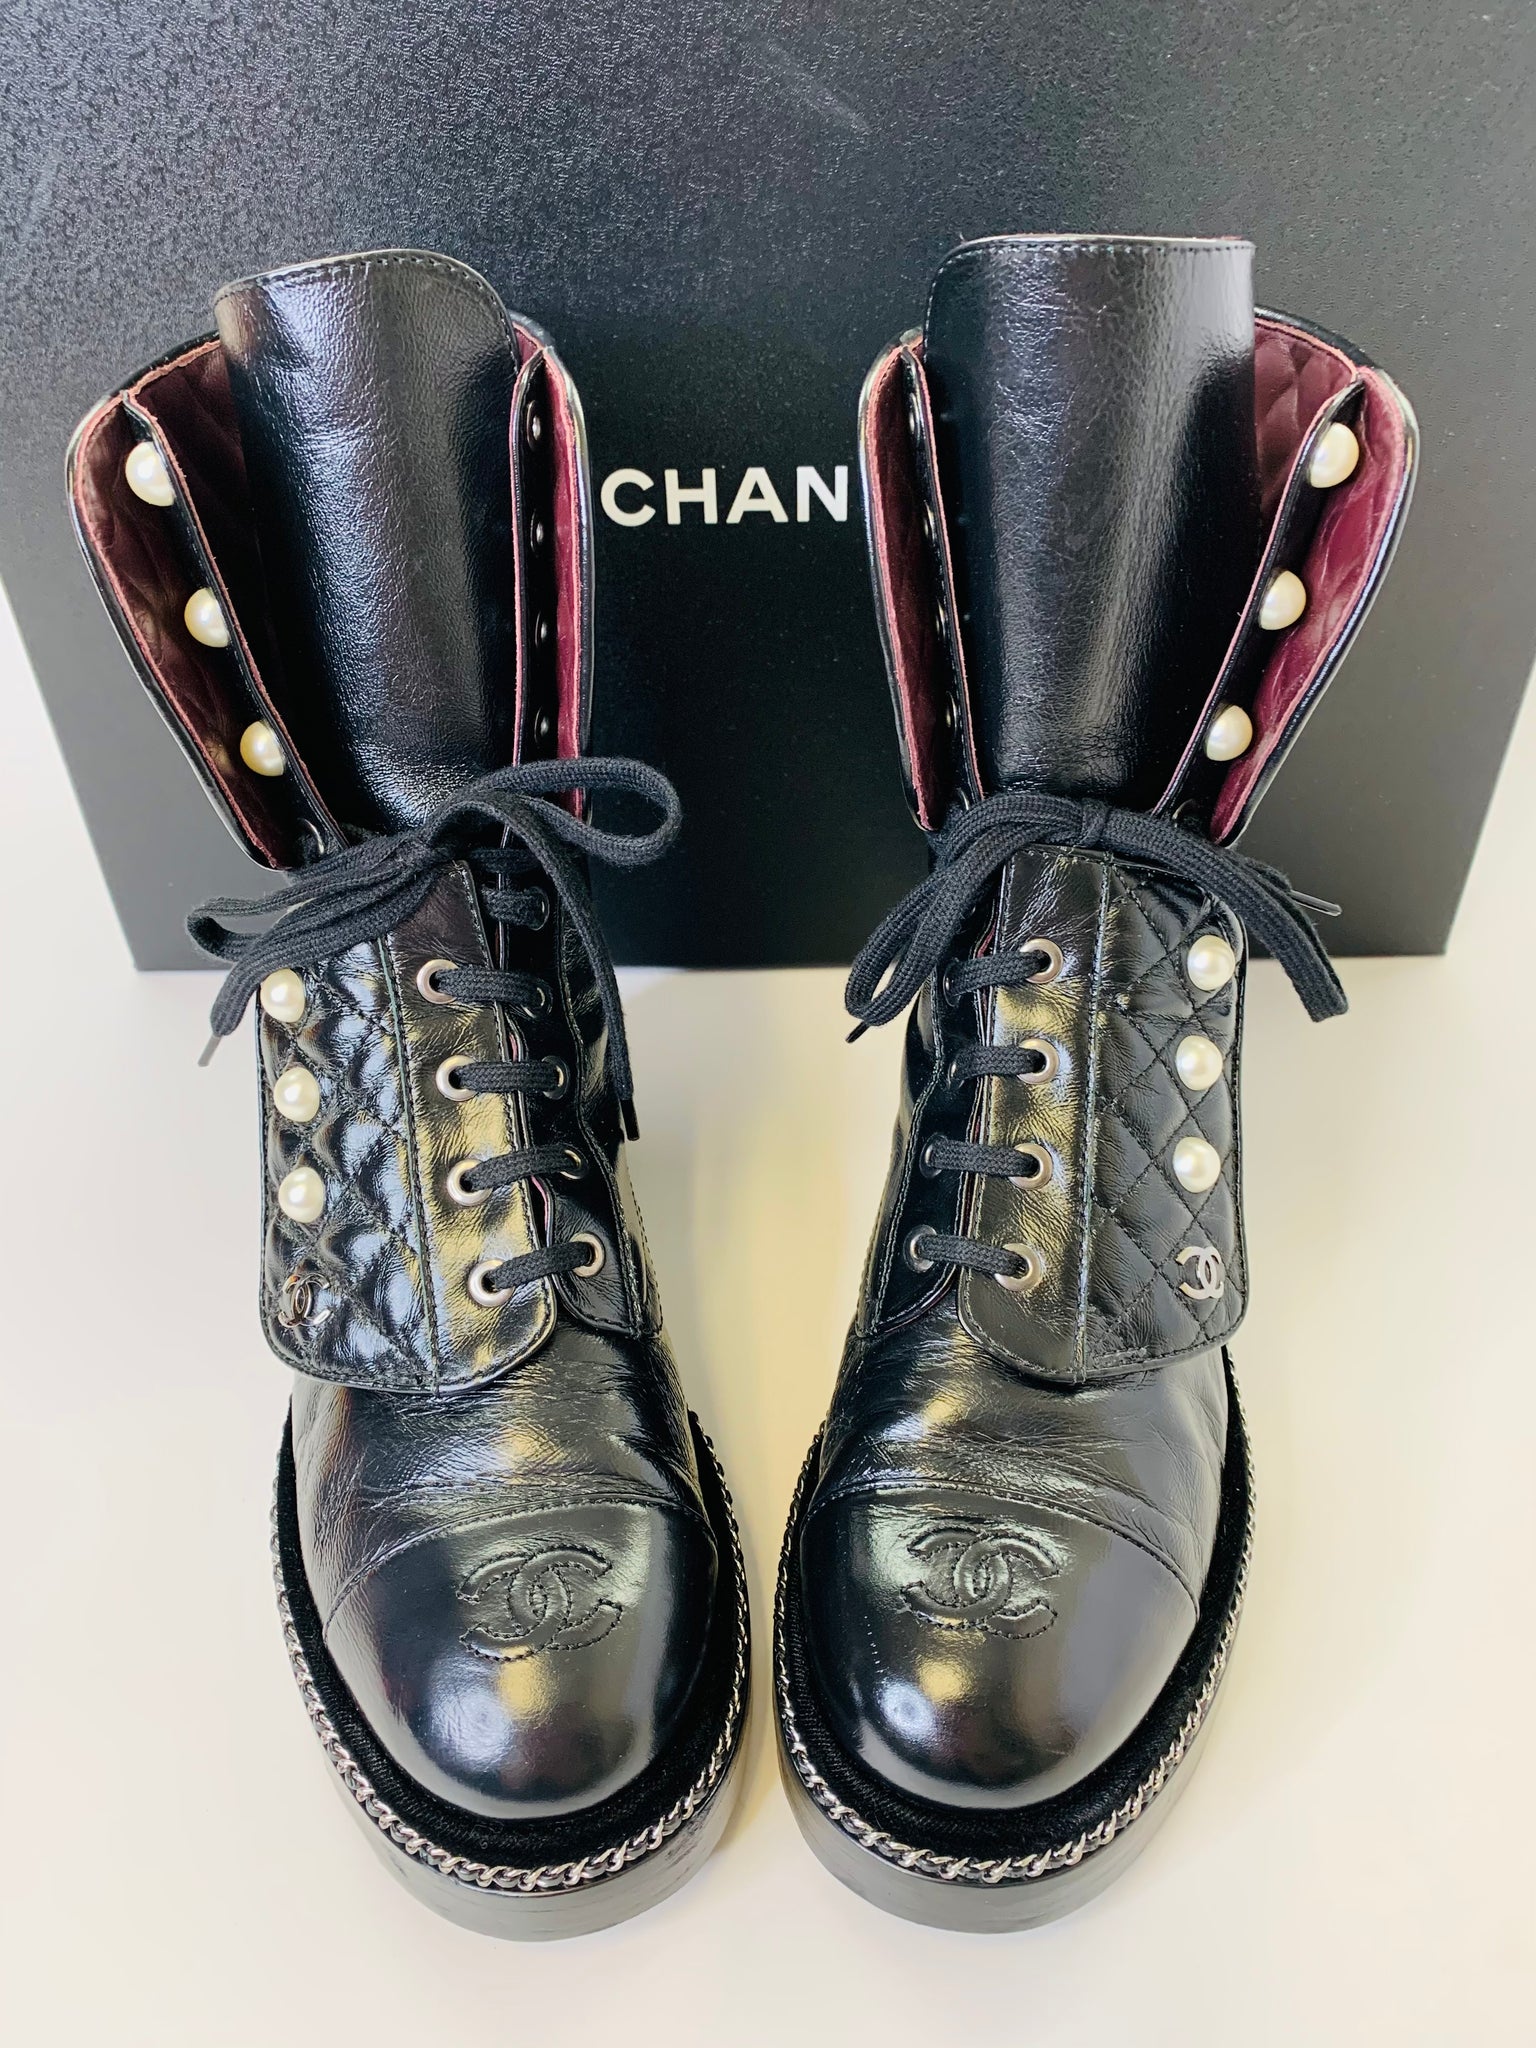 Chanel CC Black Booties Pearl Heels Ankle Boots 36.5